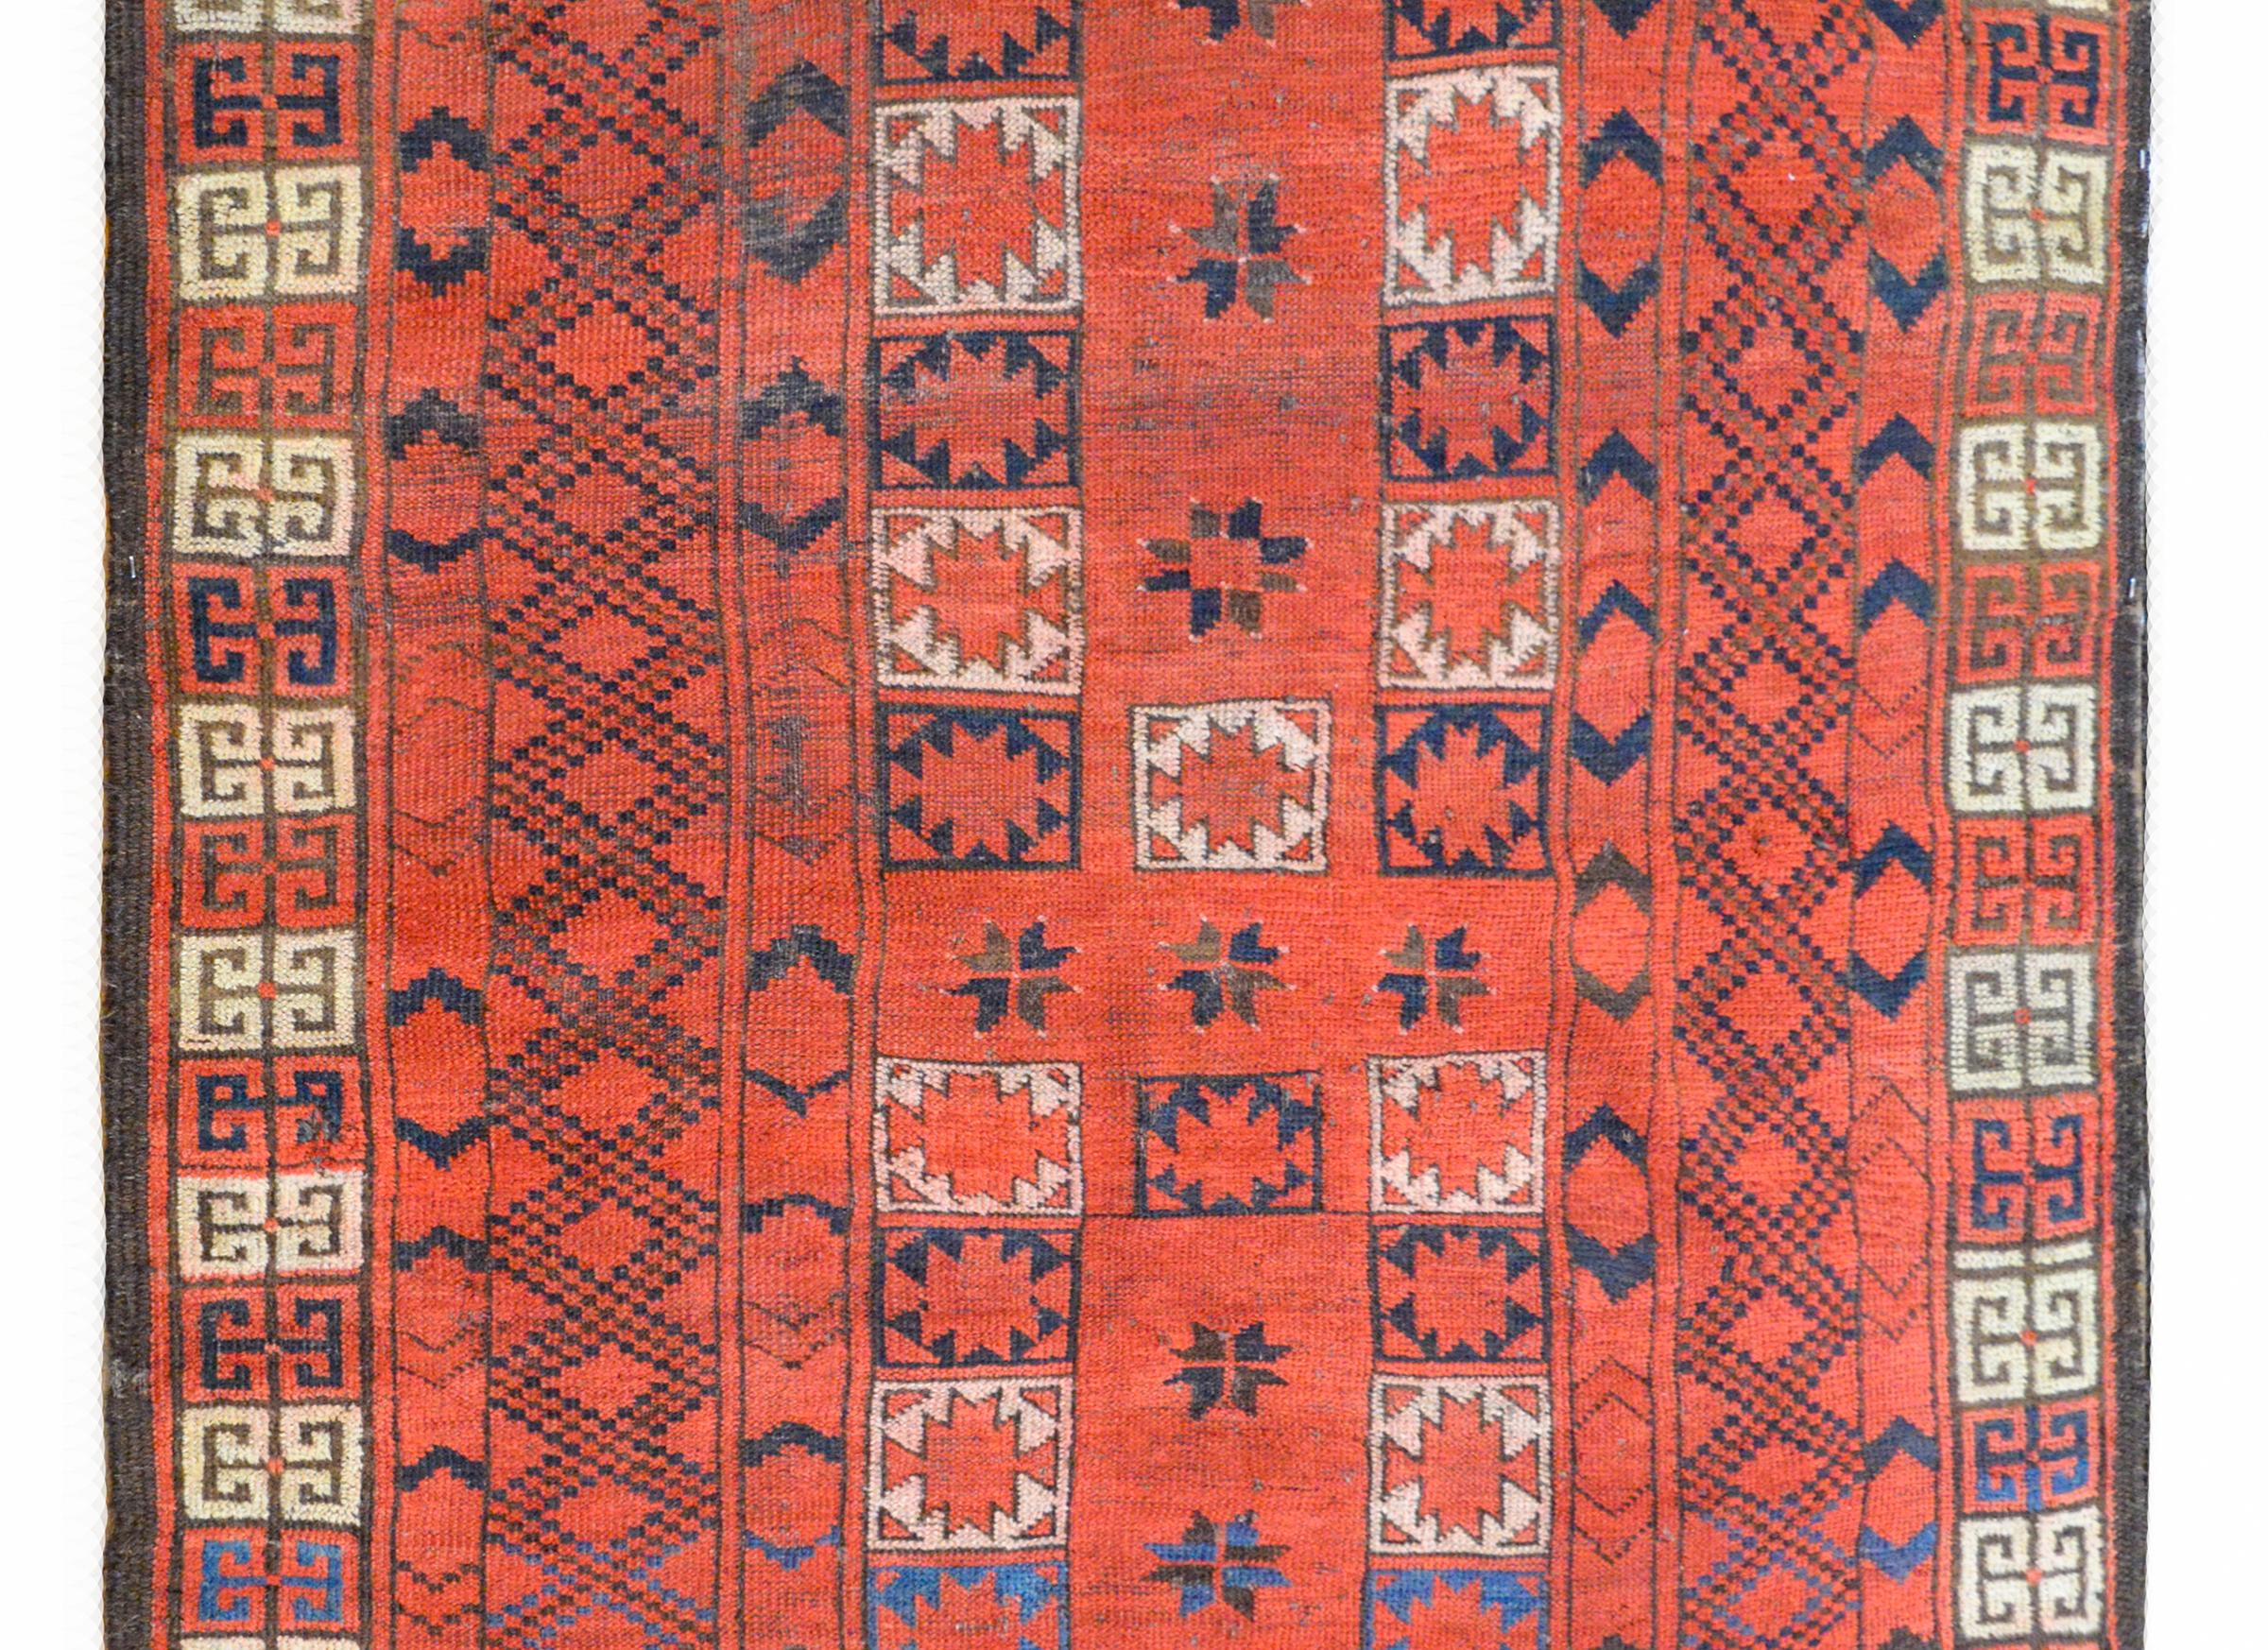 A gorgeous early 20th century Persian Ersari rug with an all-over stylized floral pattered woven in crimson, white, and indigo, against a crimson background, and surrounded by multiple geometric pattered stripes.